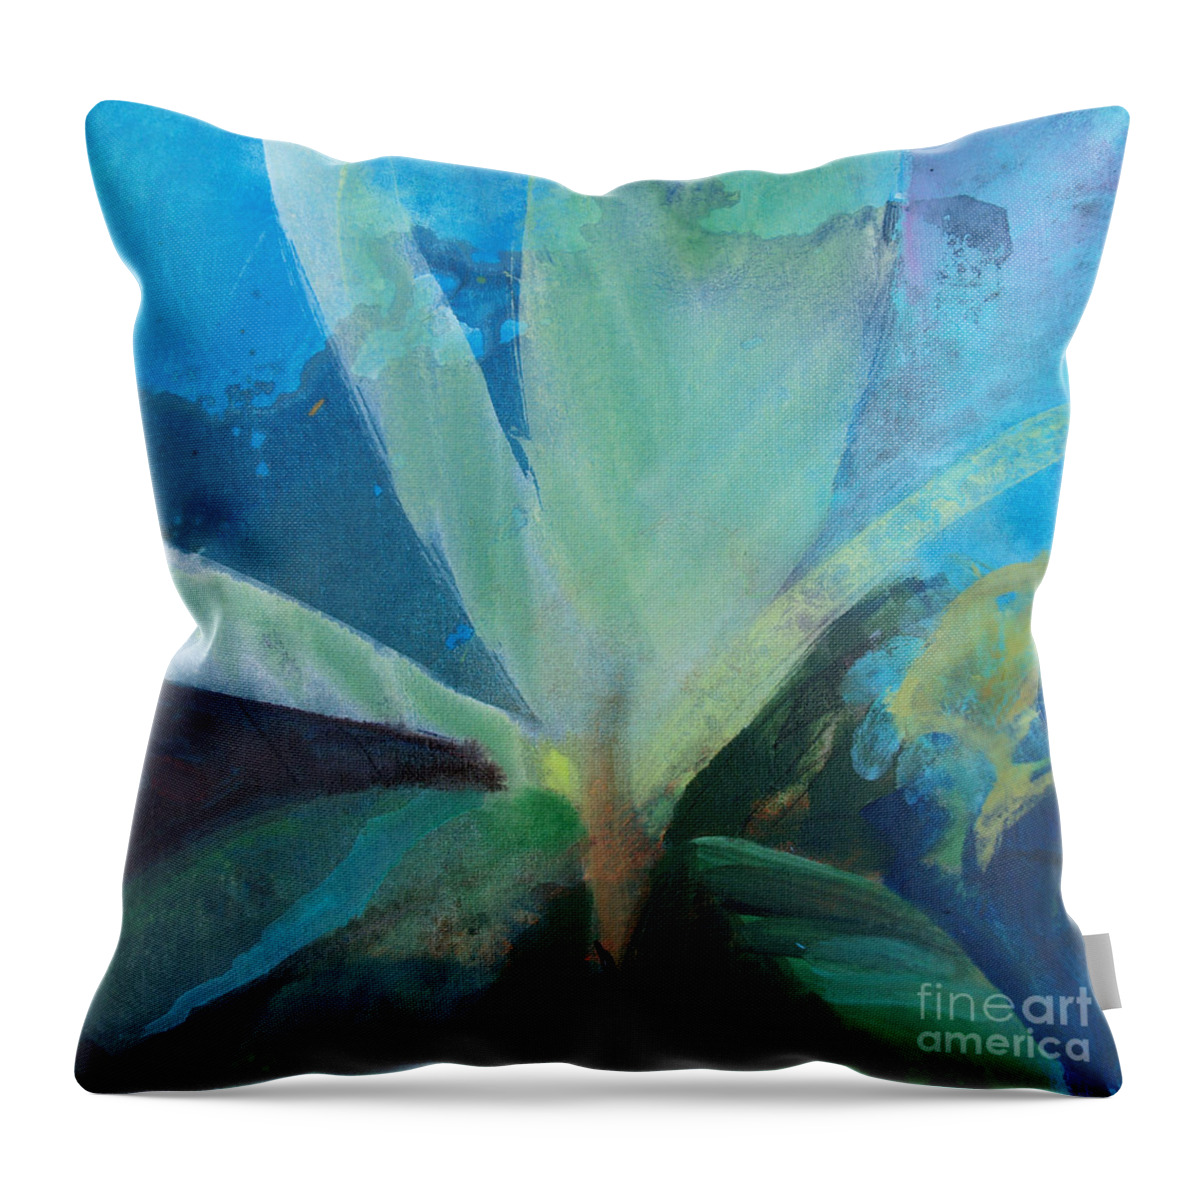 Ginger Tea Throw Pillow featuring the painting Ginger Tea by Robin Pedrero